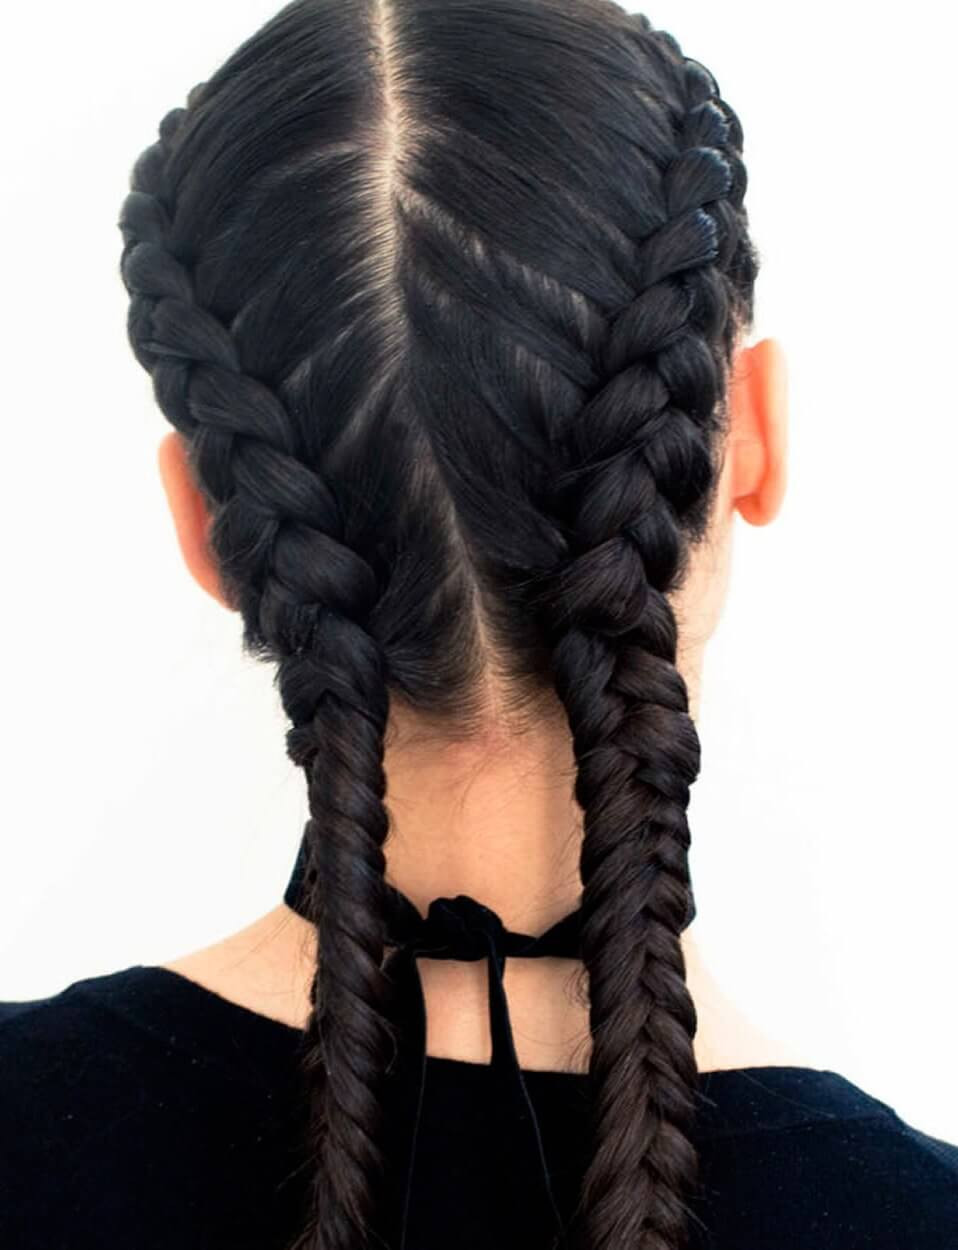 French Braid Hairstyles With Weave
 How to Braid Learn To Make 3 Types of Braids